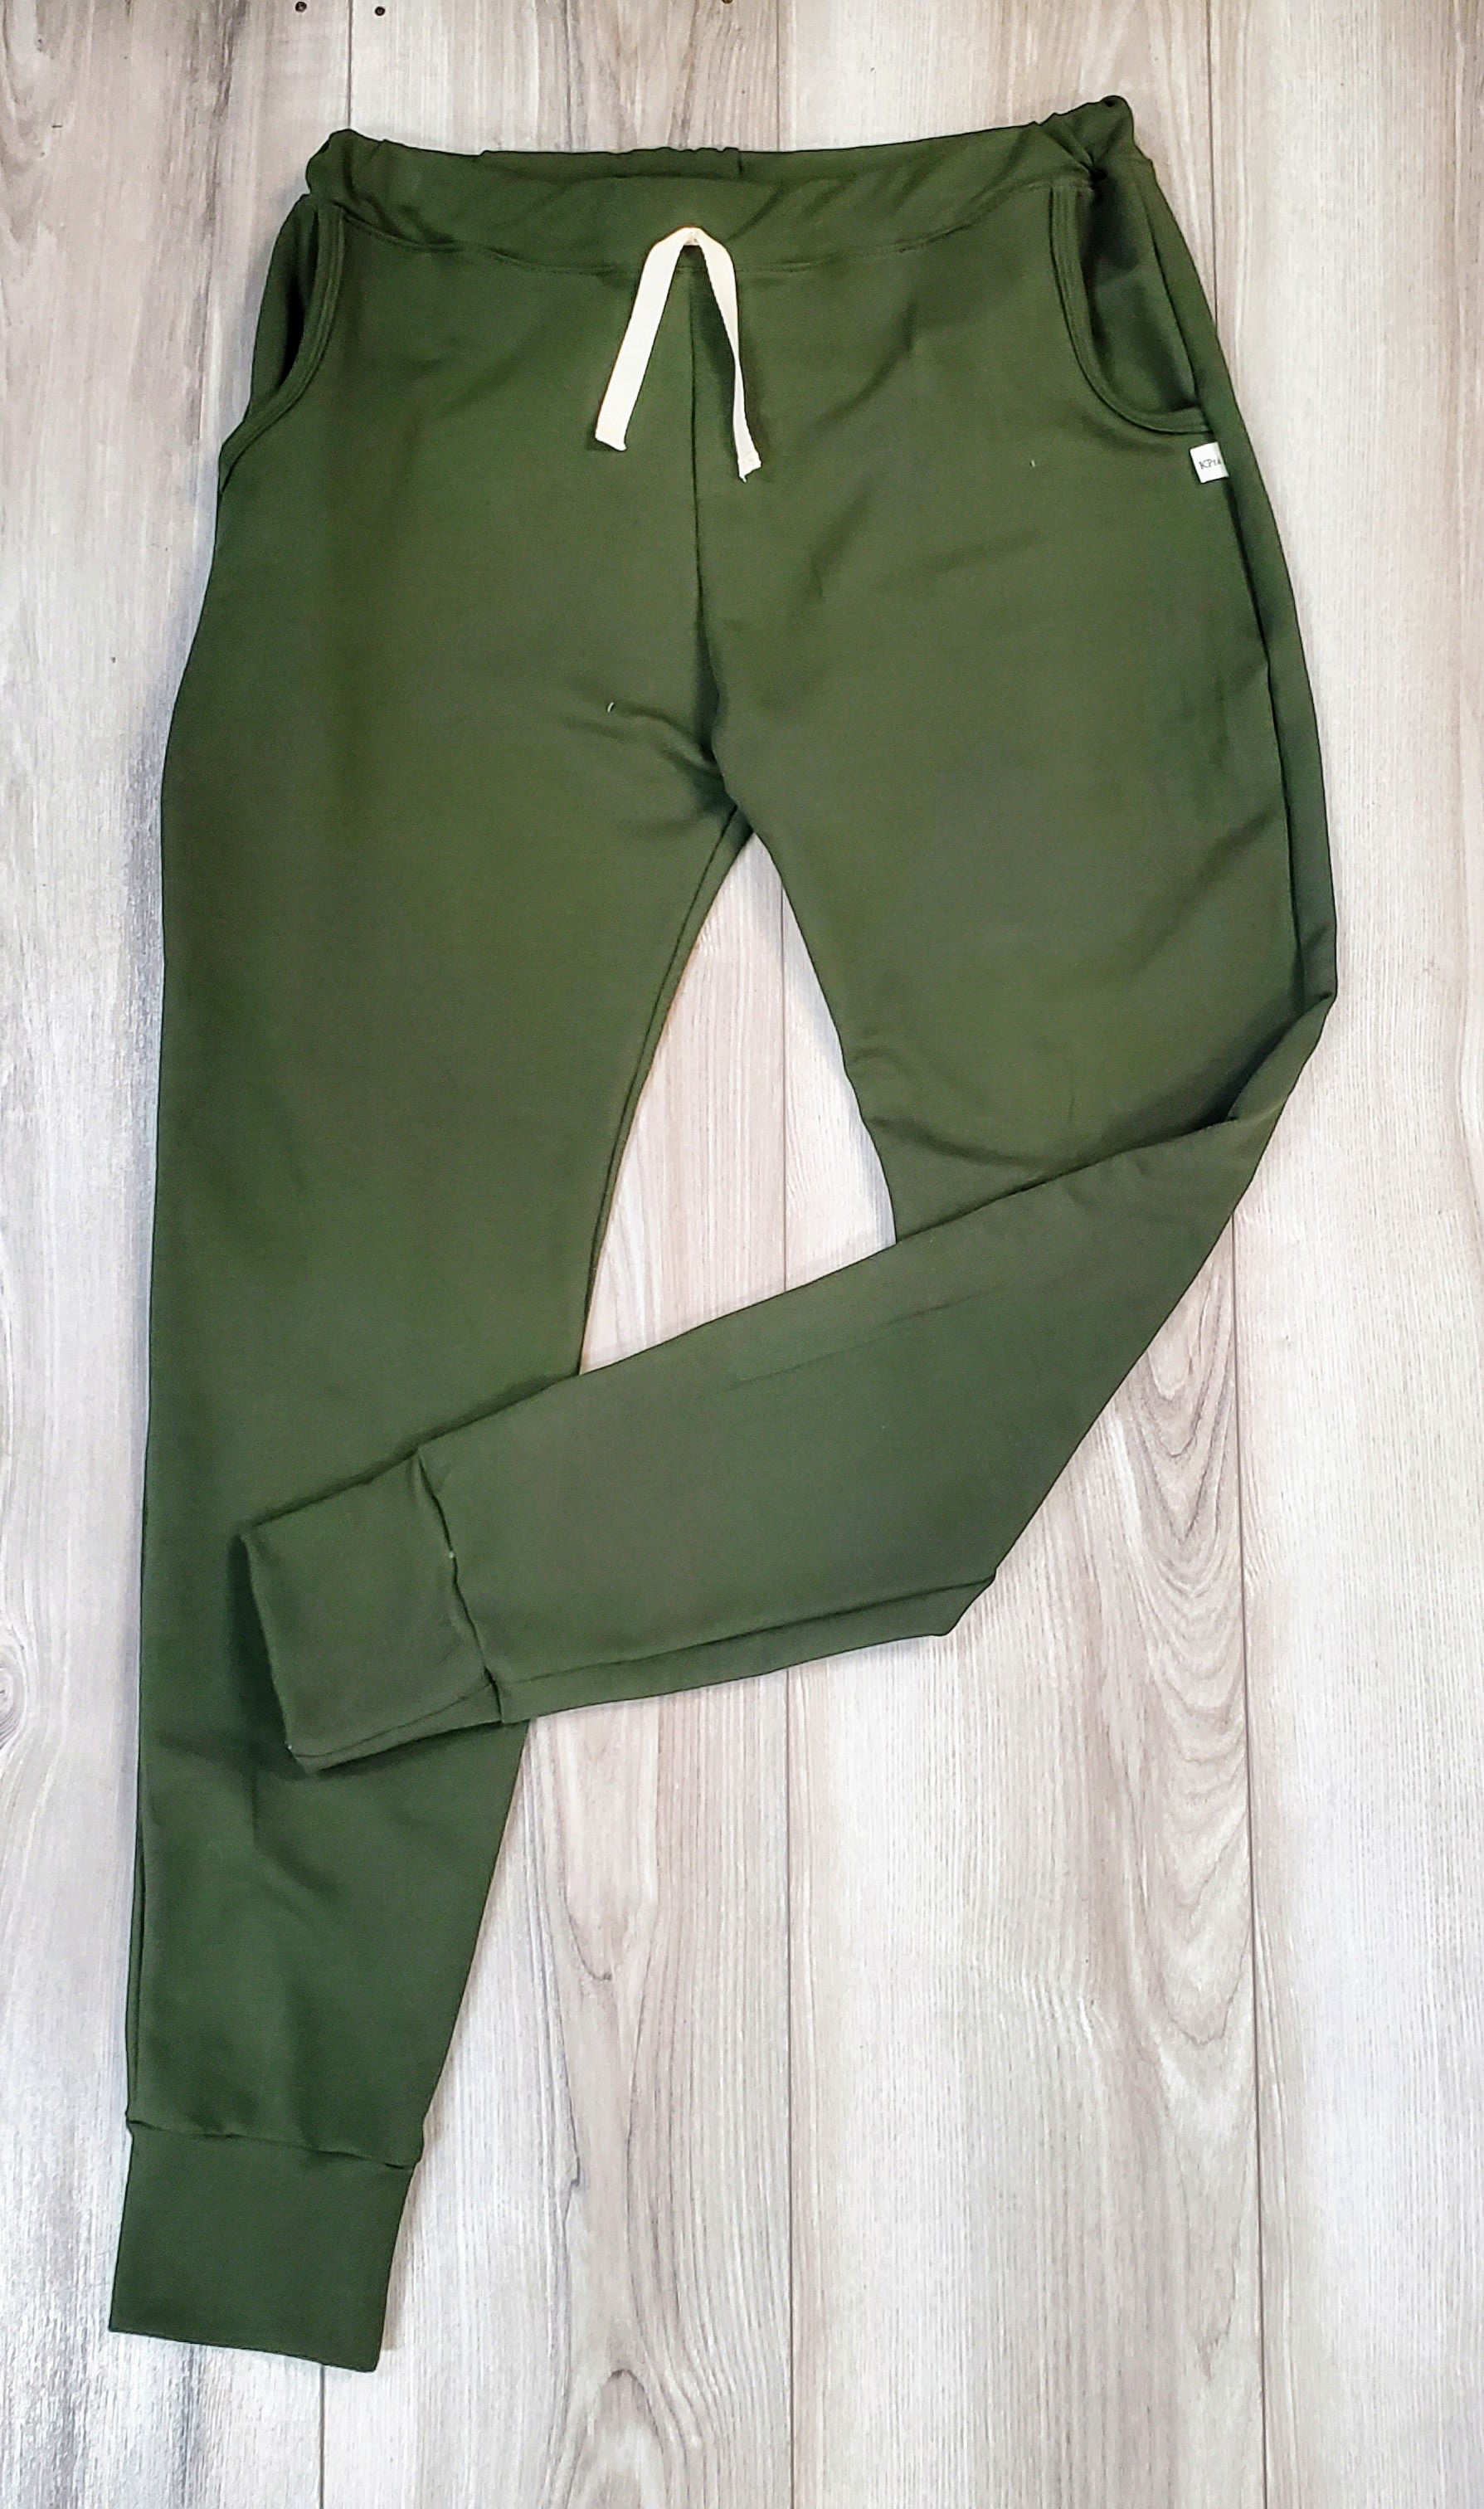 Olive Joggers